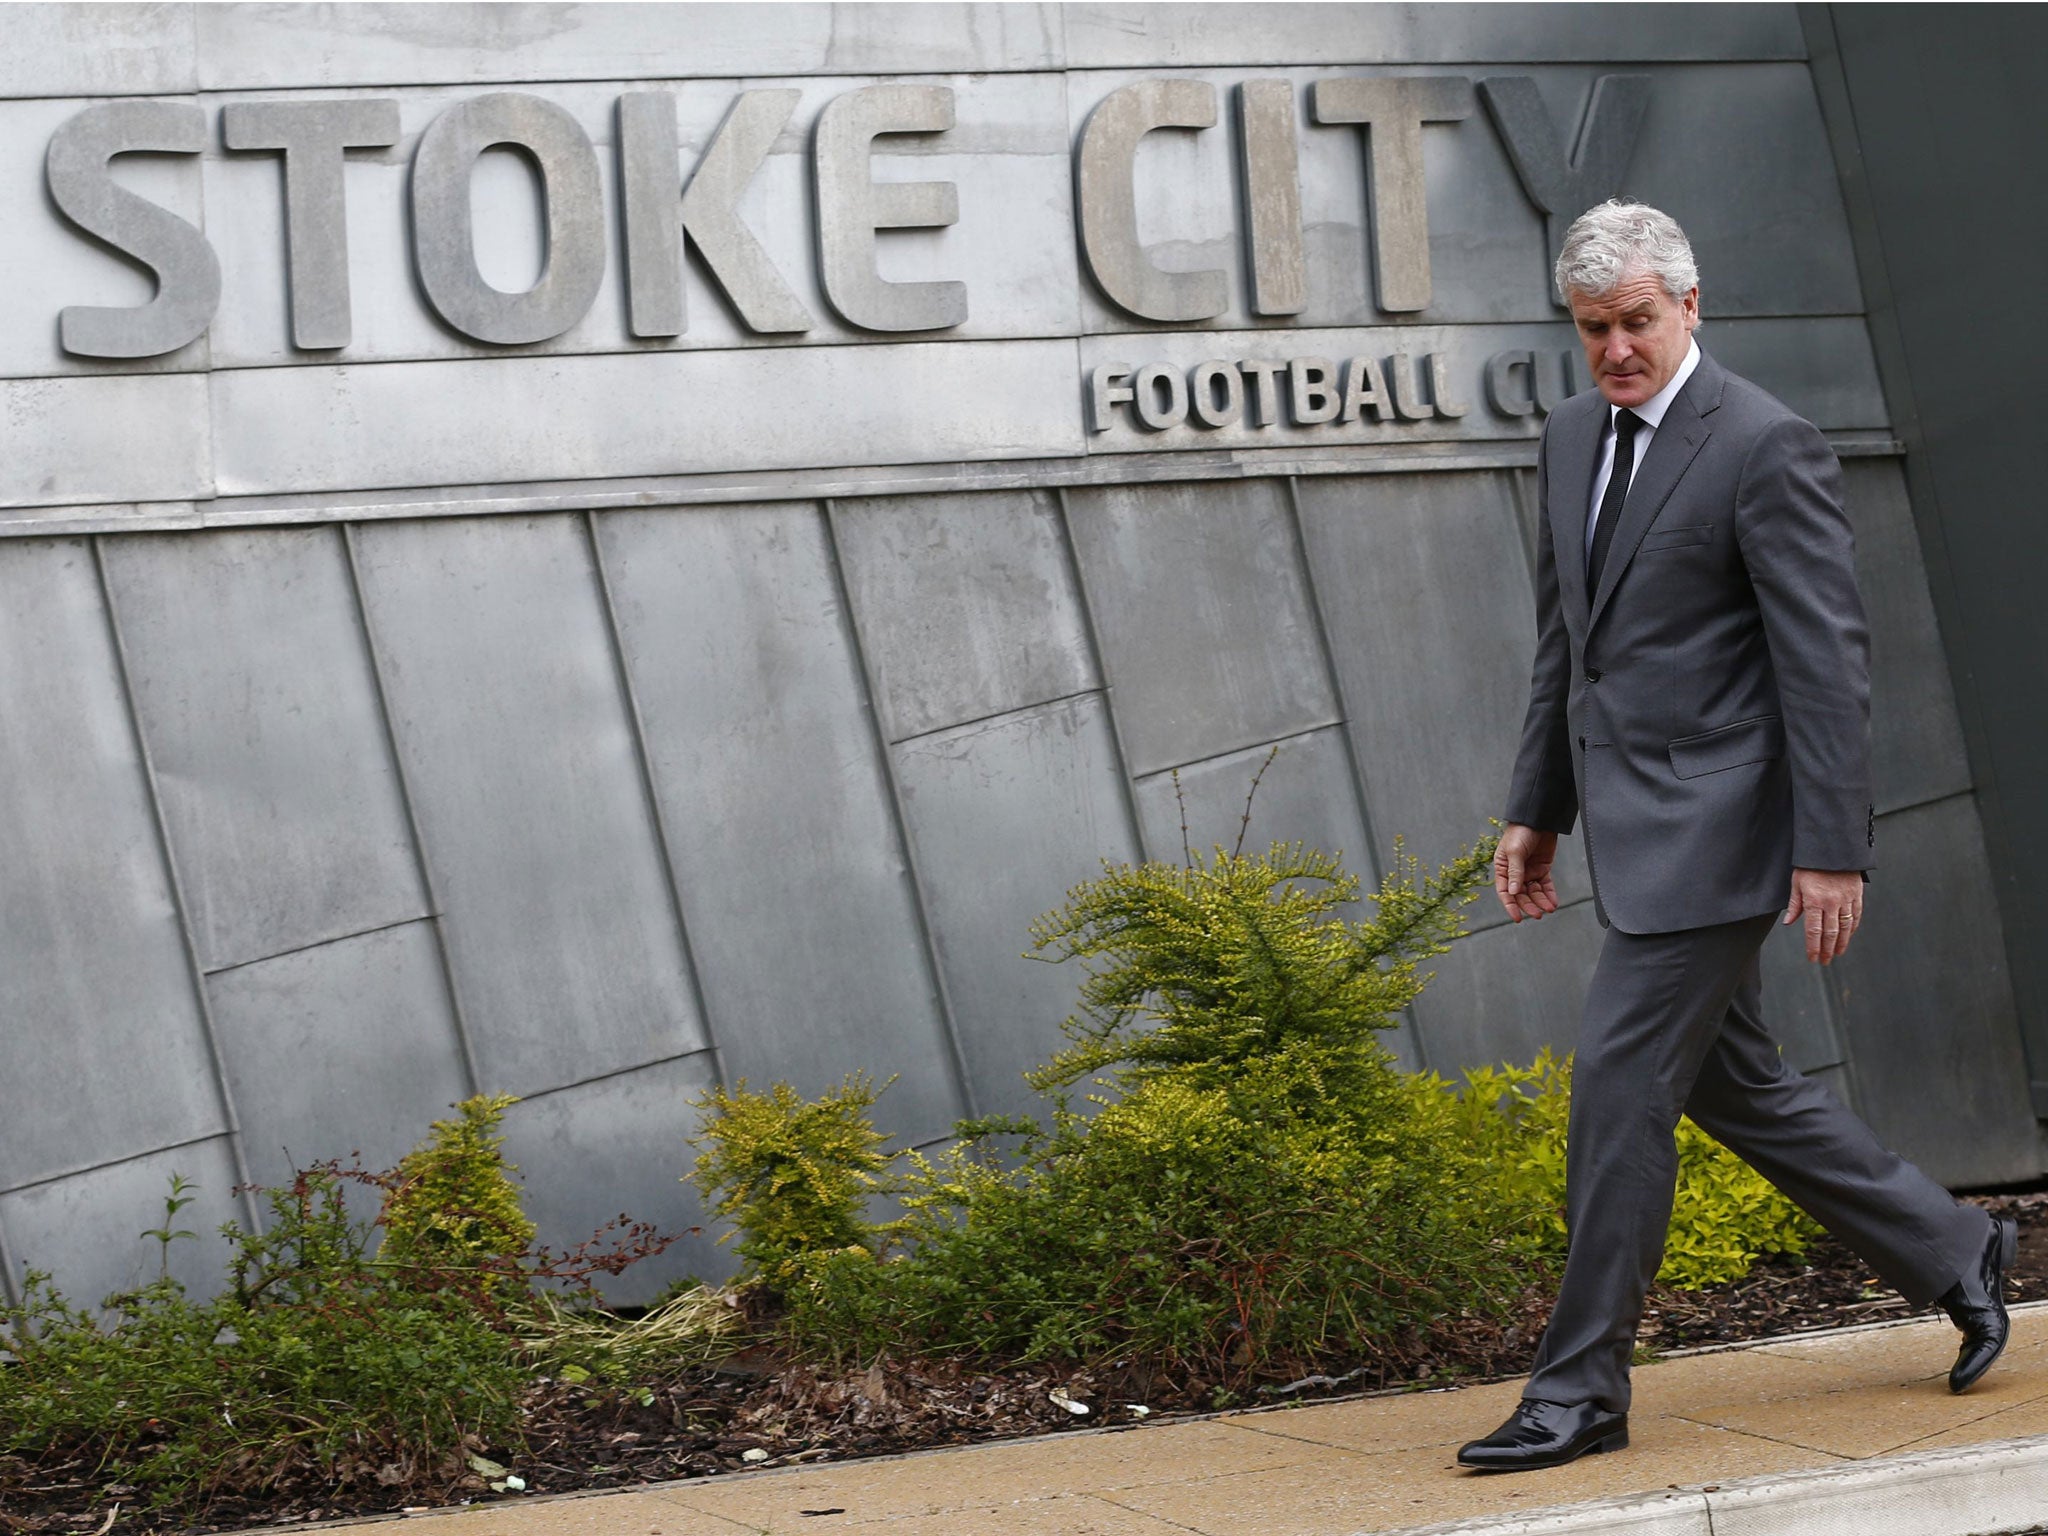 Mark Hughes arrives at Stoke to find a club already established by Tony Pulis